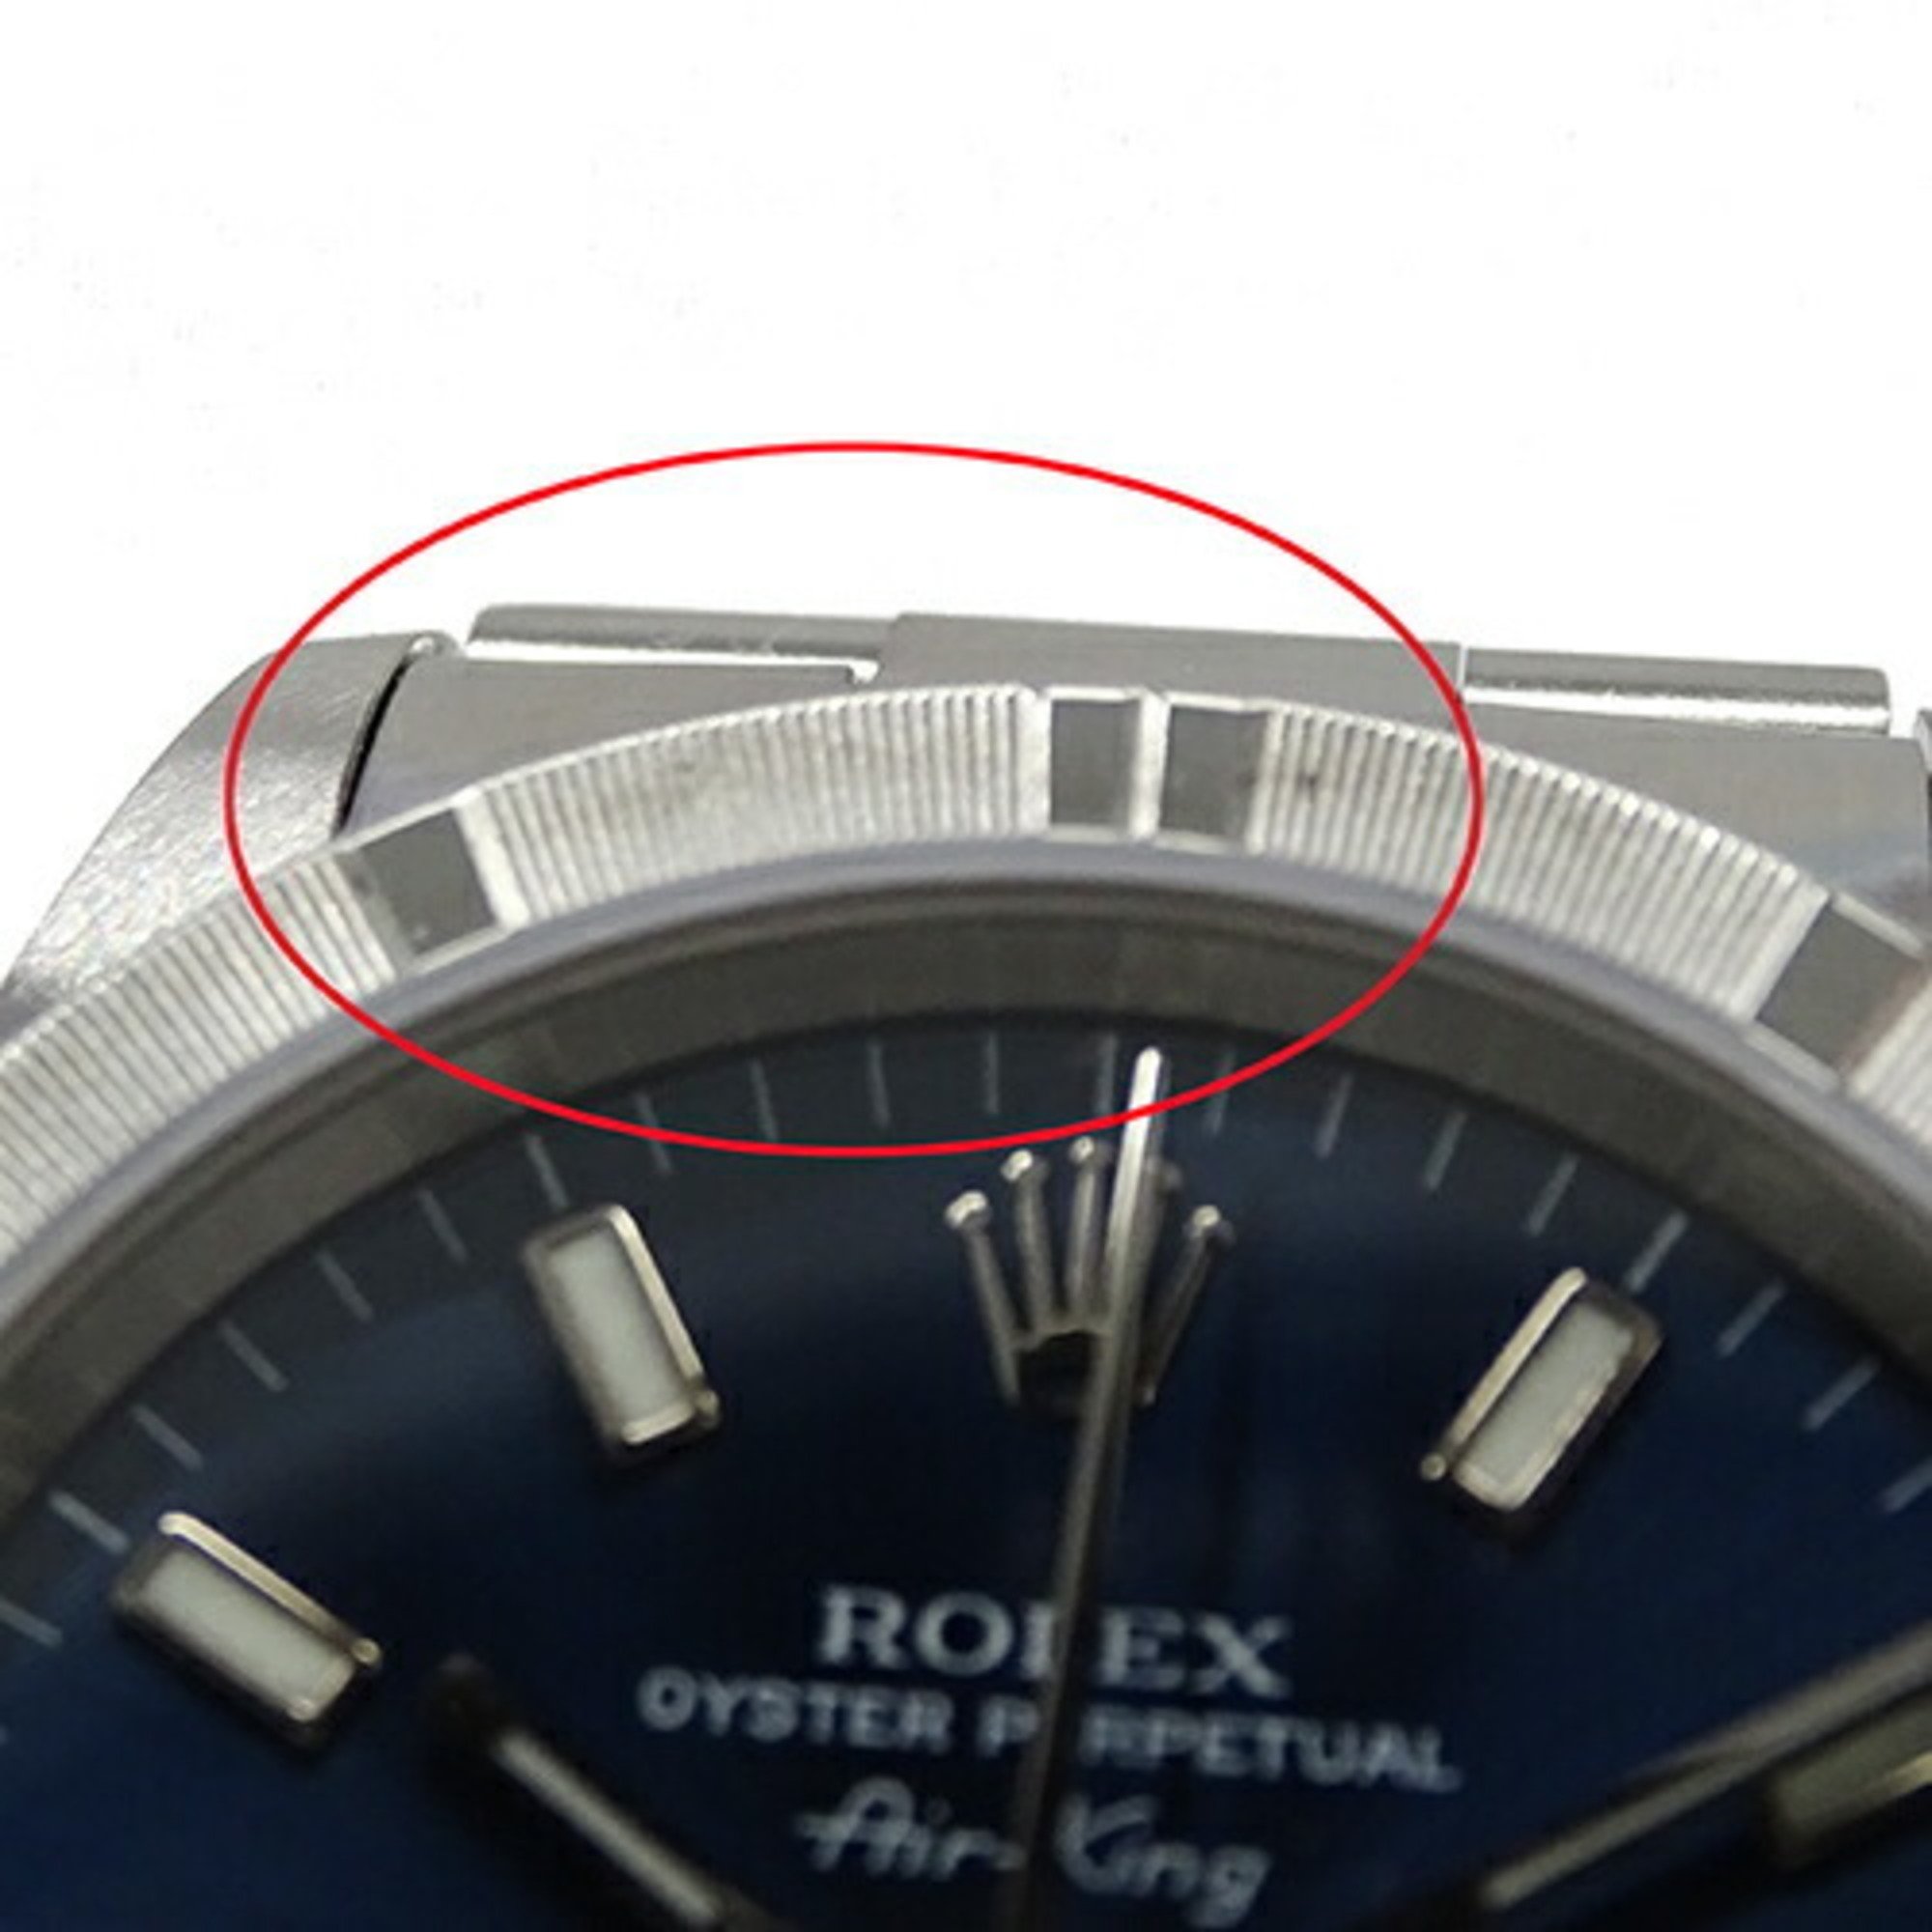 Rolex ROLEX Air King 14010M Y-series watch, men's, automatic, AT, stainless steel, SS, silver, blue, polished